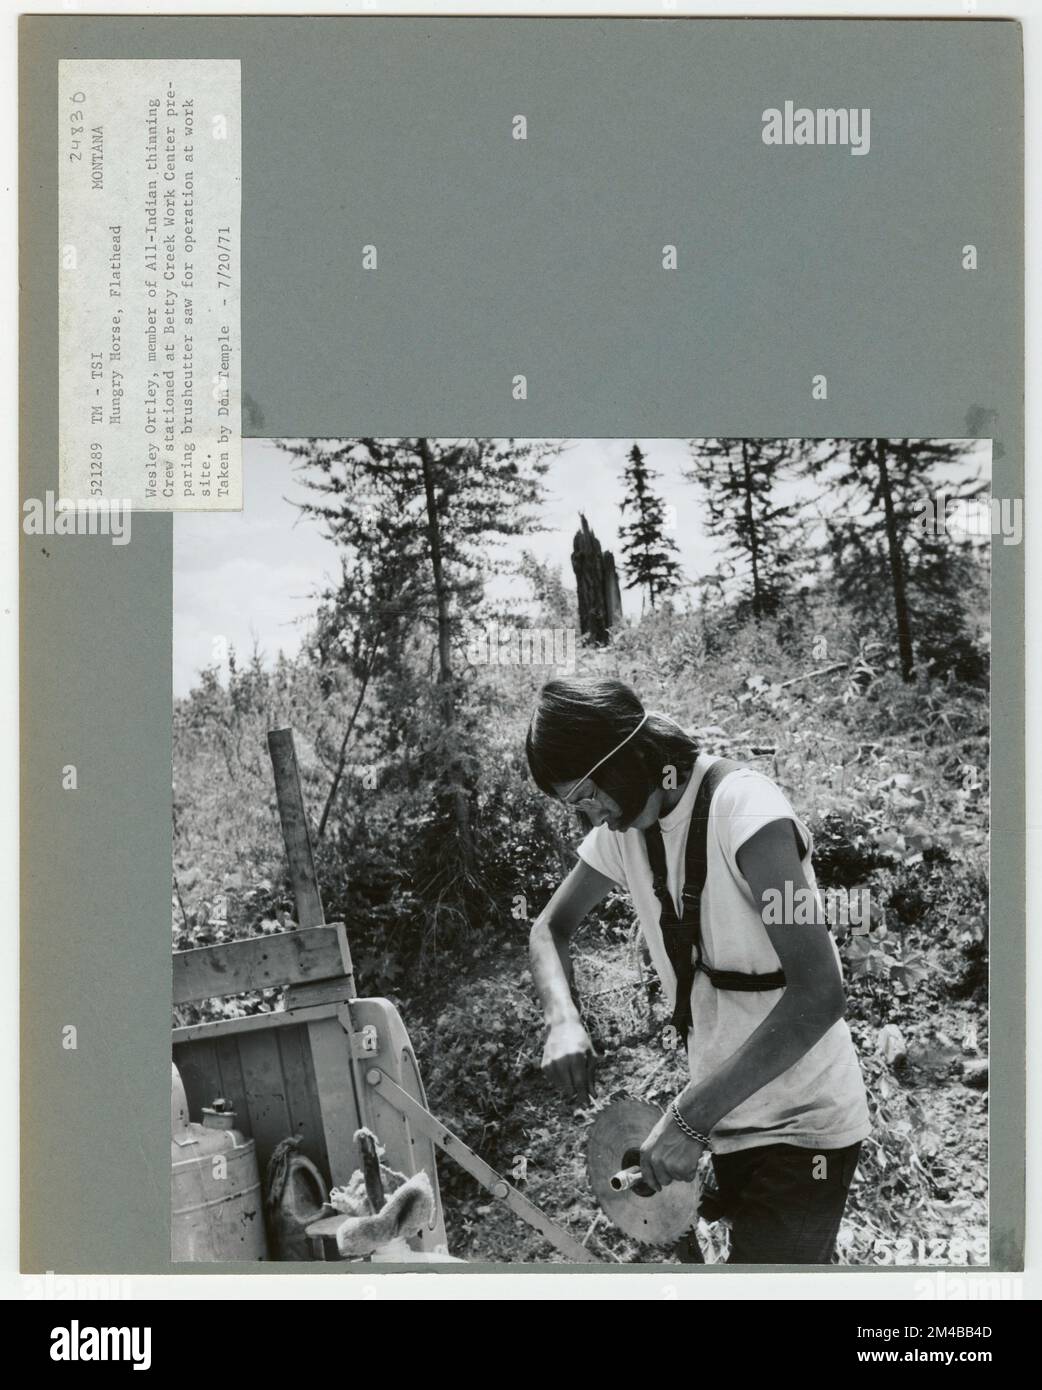 Thinning - Montana. Photographs Relating to National Forests, Resource Management Practices, Personnel, and Cultural and Economic History Stock Photo